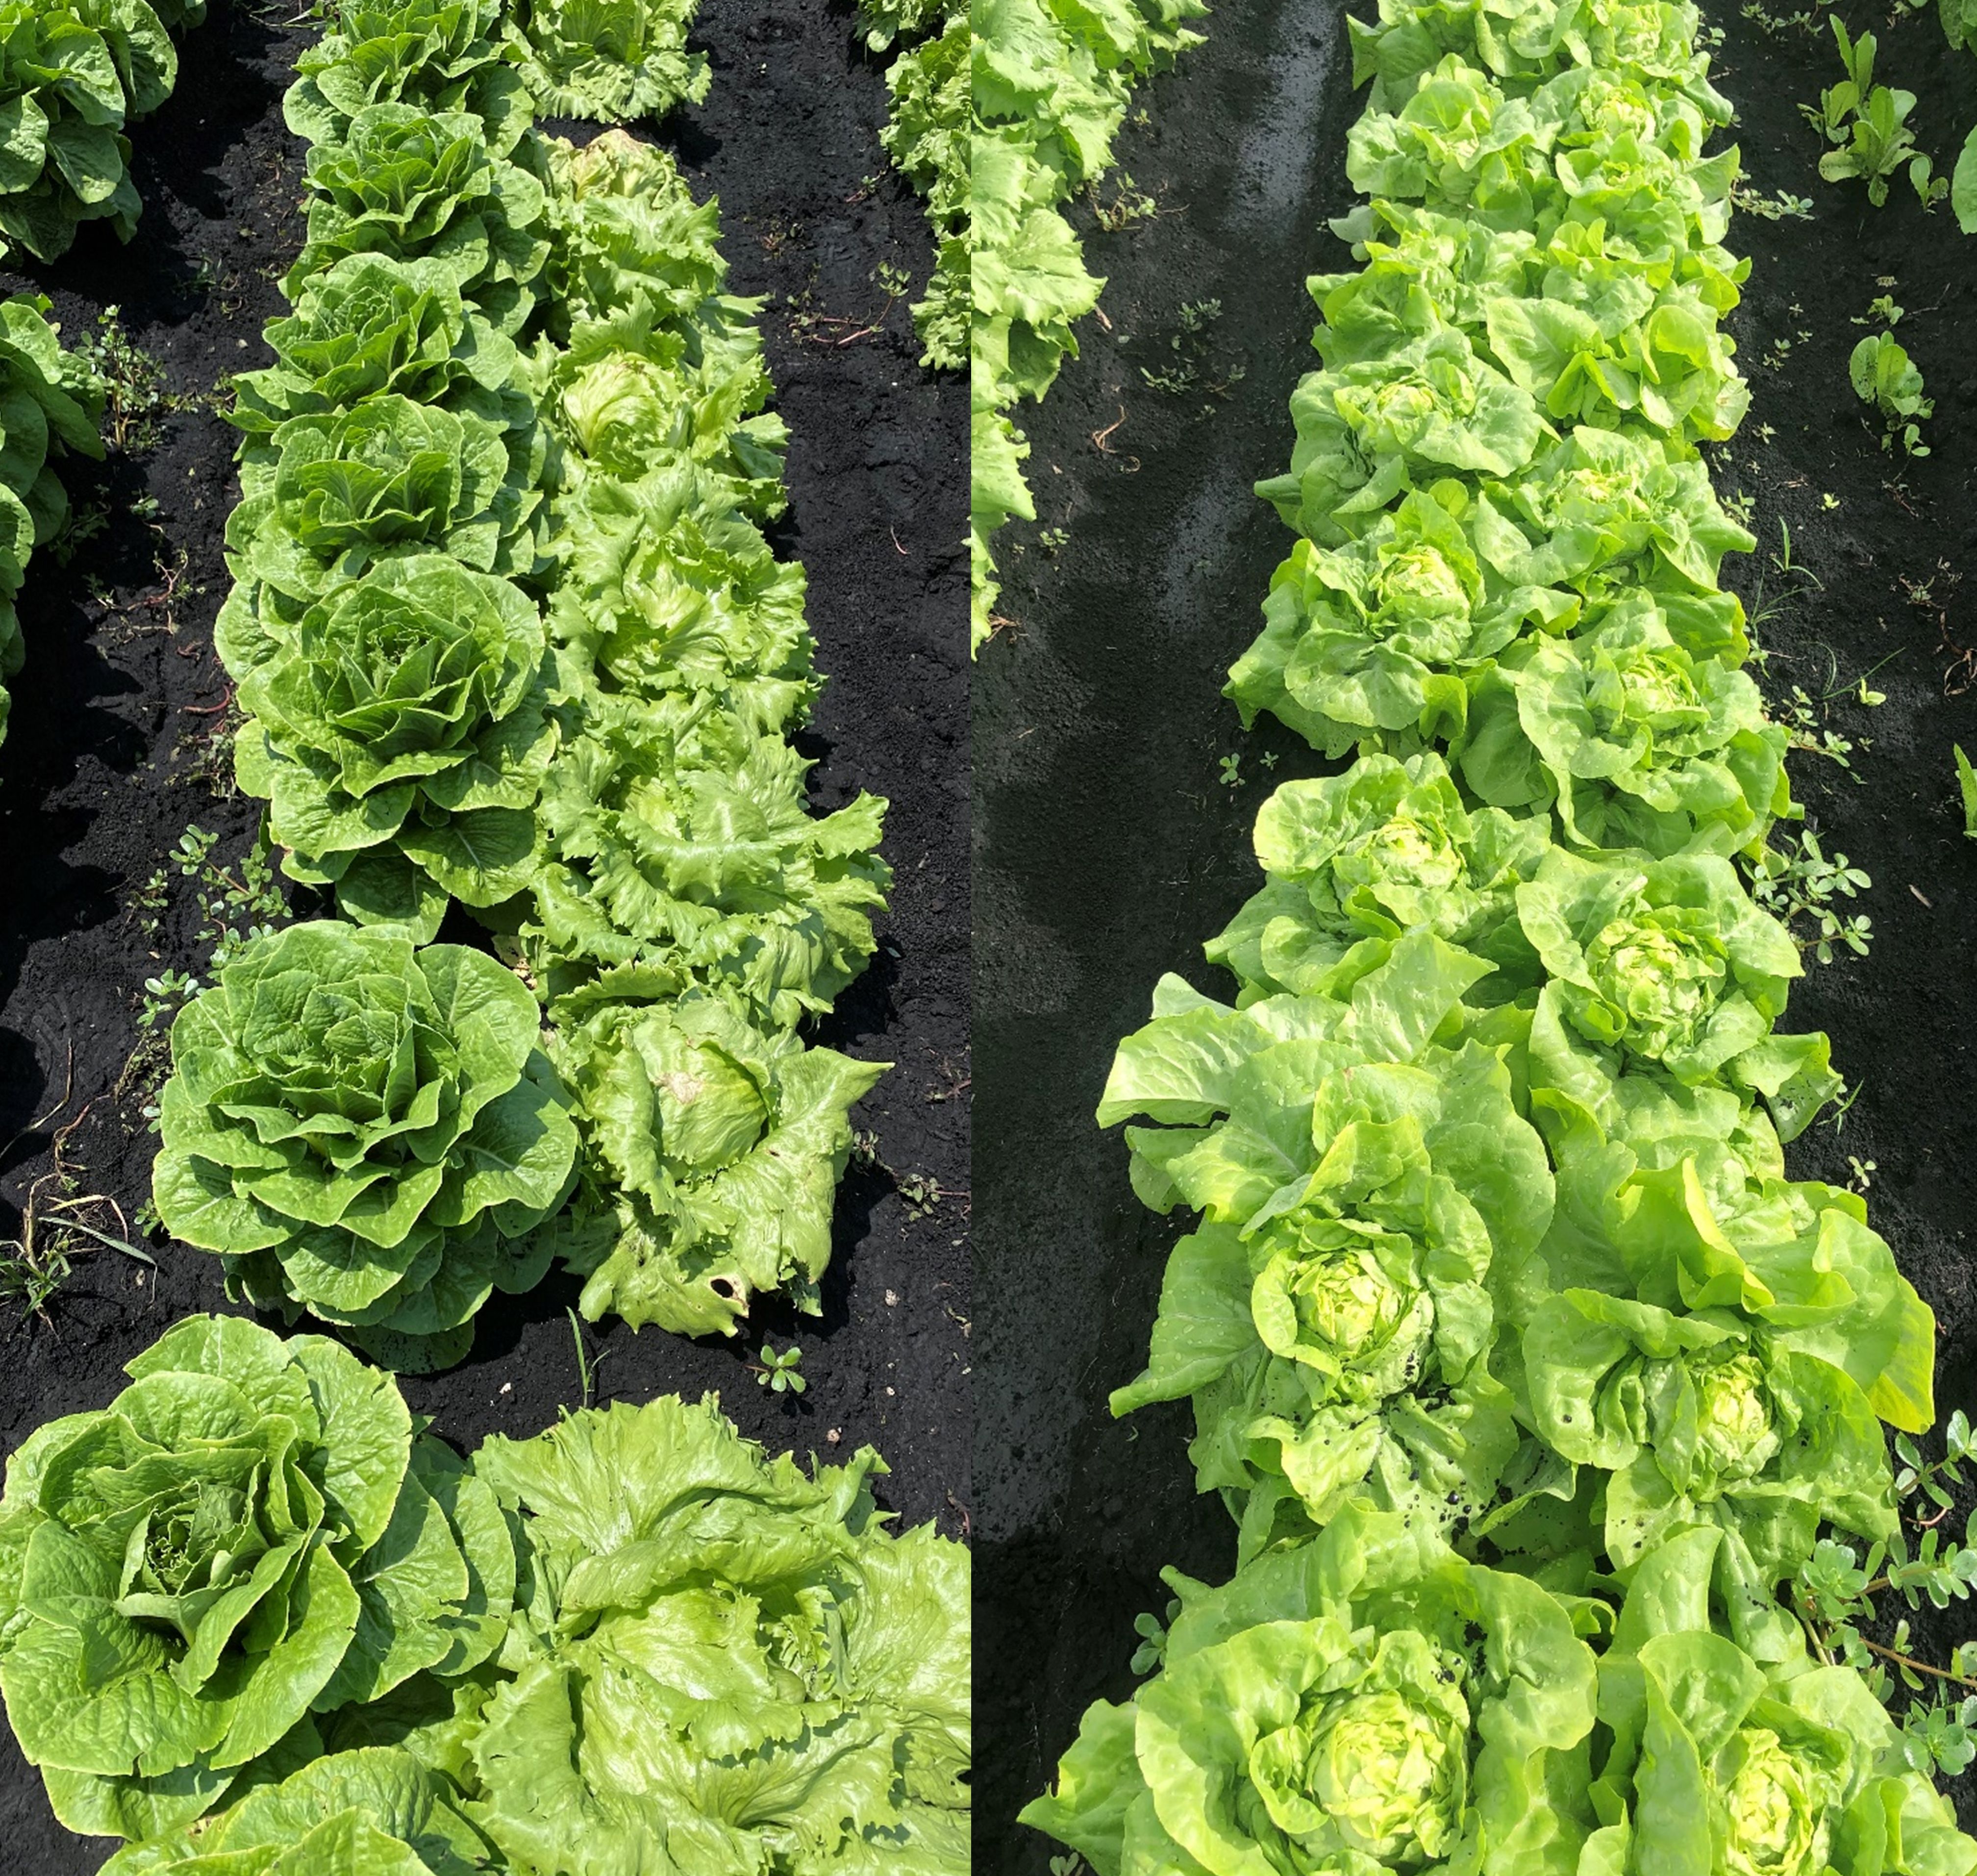 Romaine/iceberg (left) and Boston (right) lettuce planted in the rich muck land at the EAA south of Lake Okeechobee in Florida.